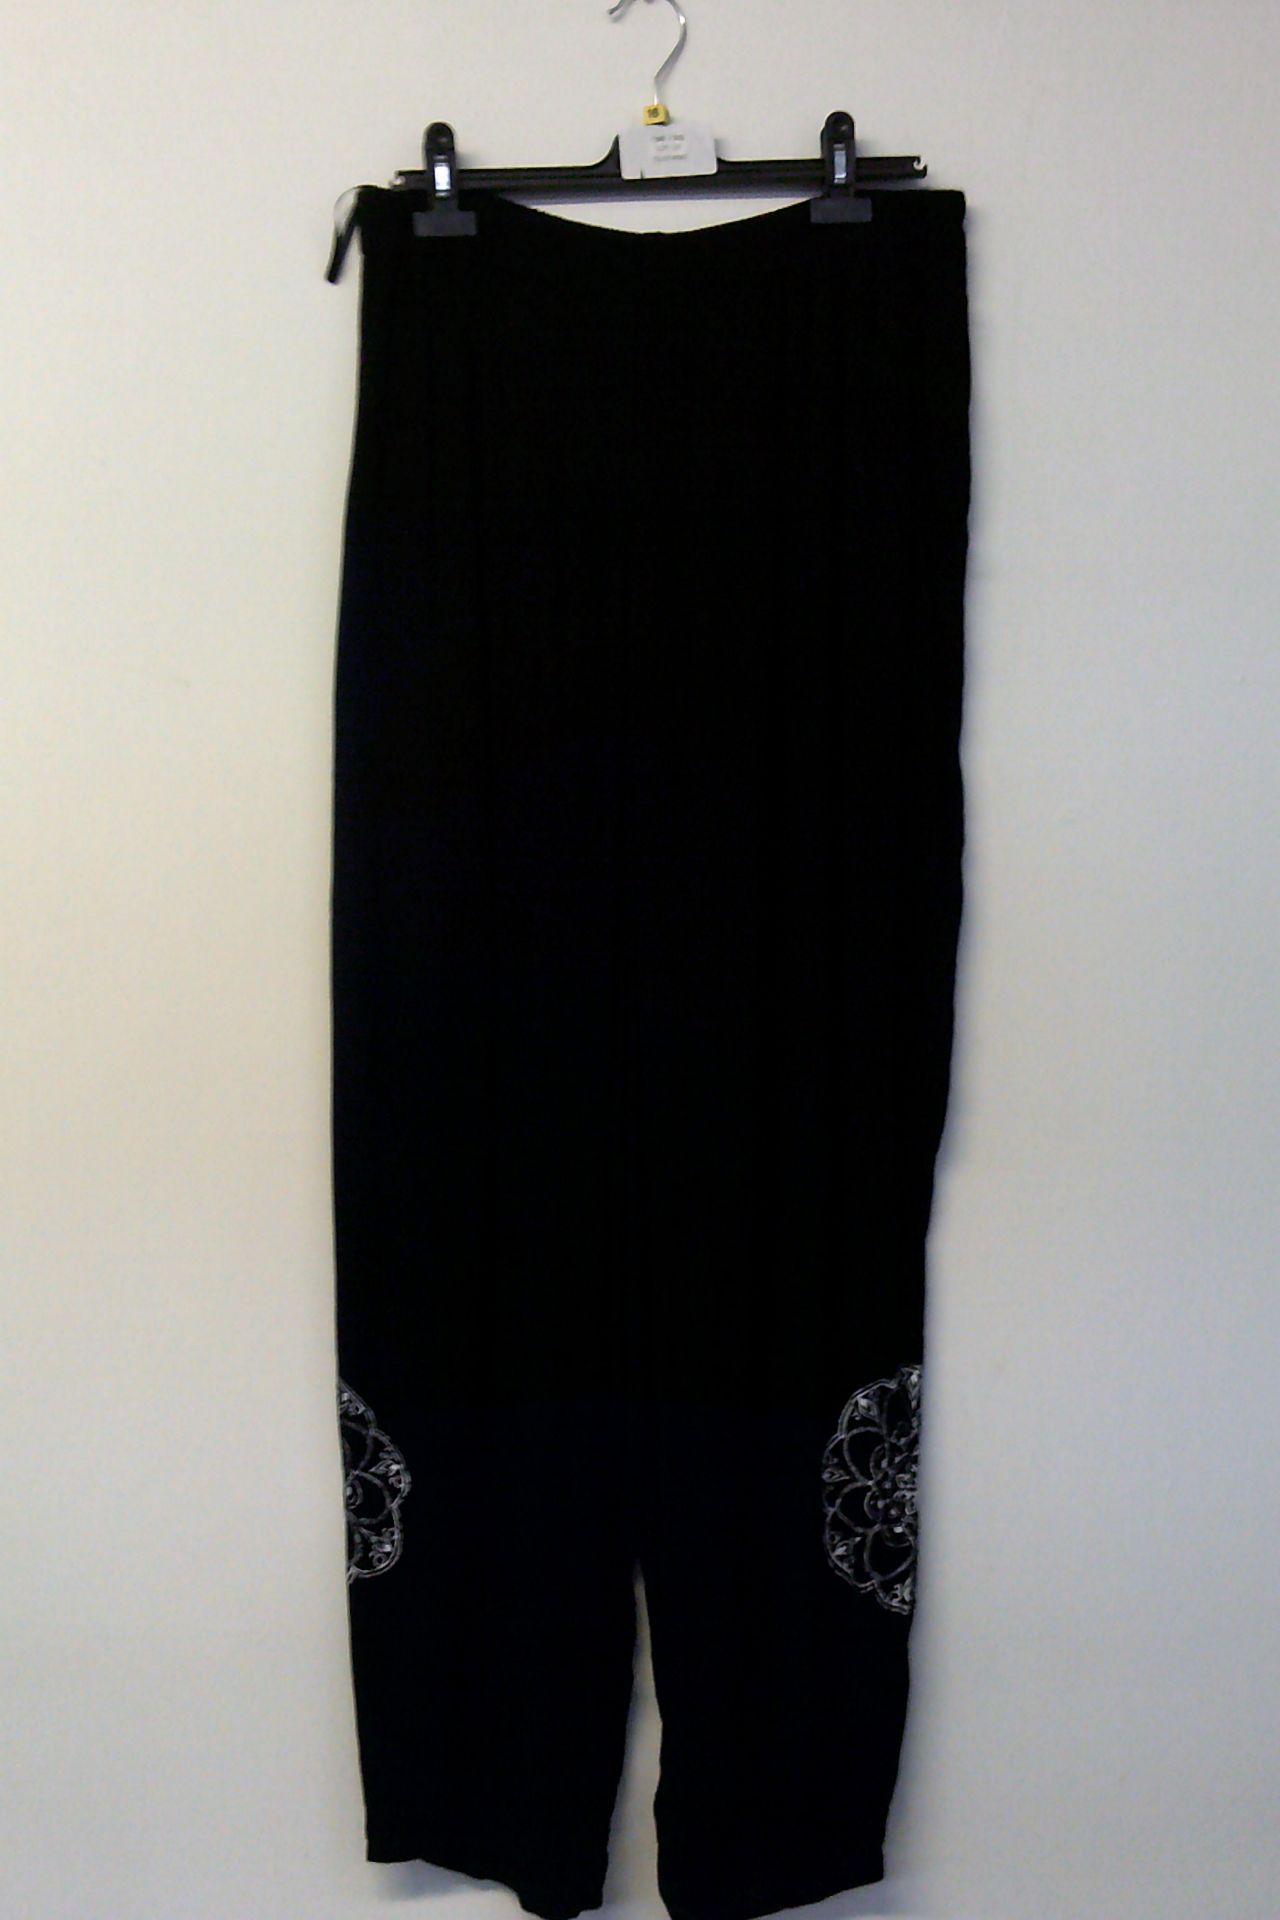 Bon Prix Collection Black Embrodiered Summer Pants Size 16